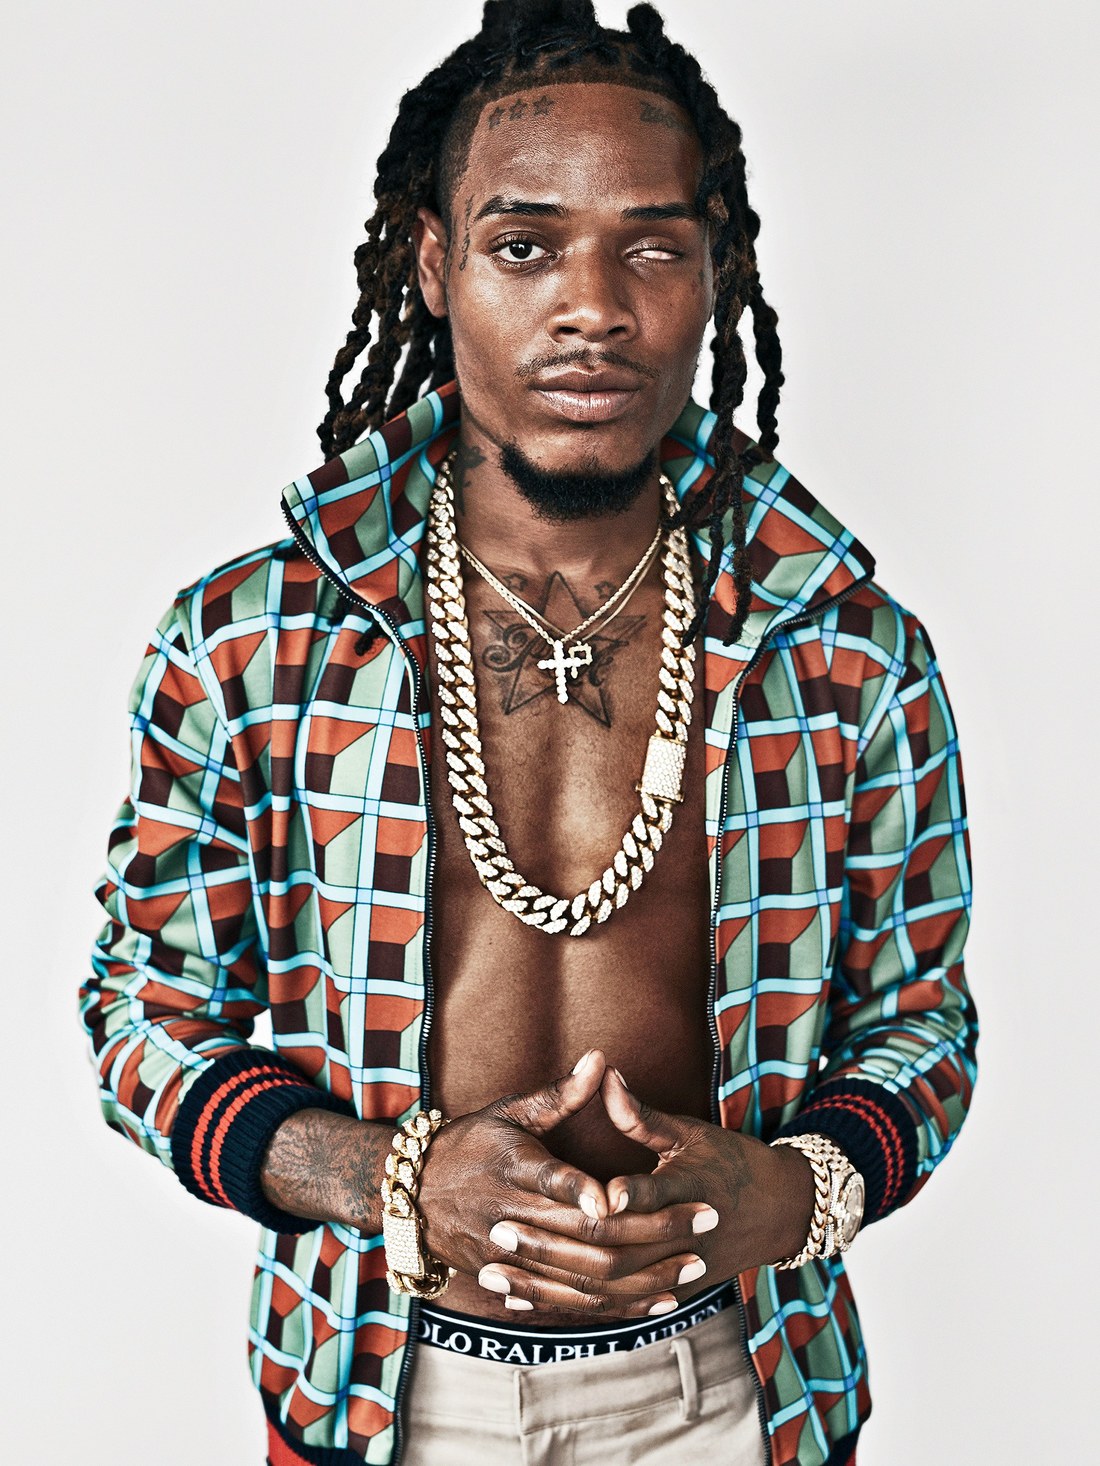 Rapper Fetty Wap wearing a print jacket, no shirt naked chest, gold bracelets on each wrist, gold watch and a 3 gold chains